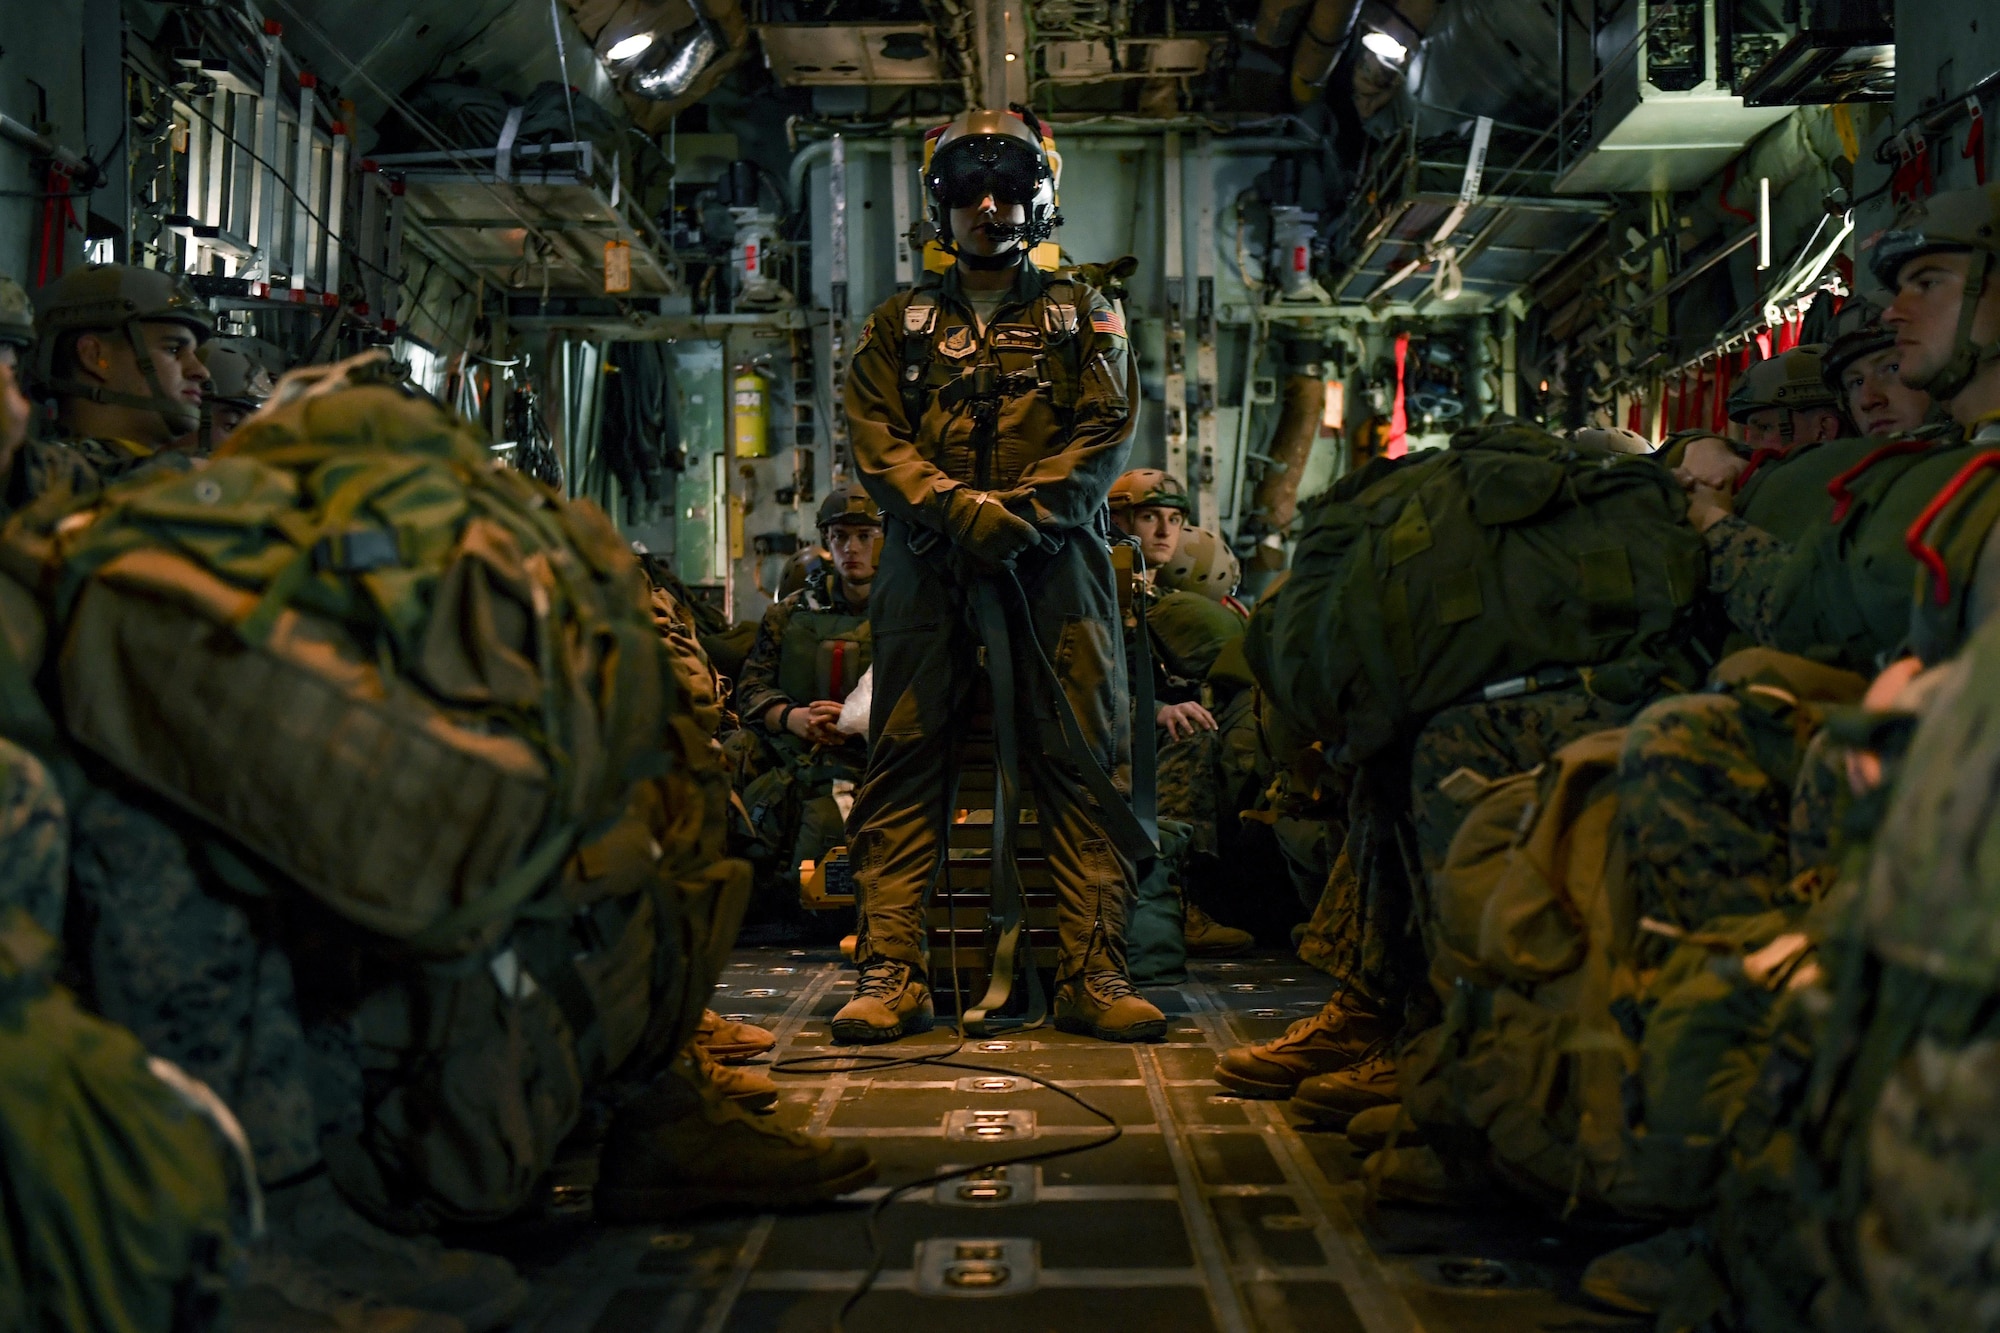 Staff Sgt. Benjamin J. Shest, 36th Airlift Squadron loadmaster, and Marines with the 3rd Reconnaissance Battalion, 3rd Marine Division, III Marine Expeditionary Force, wait in a C-130 Hercules before a static line parachute drop on Jan. 11, 2017, at Yokota Air Base, Japan. The Marines work with the 36th Airlift Squadron four times a year to help maintain jump qualifications and promote bilateral training. (U.S. Air Force photo by Airman 1st Class Donald Hudson)